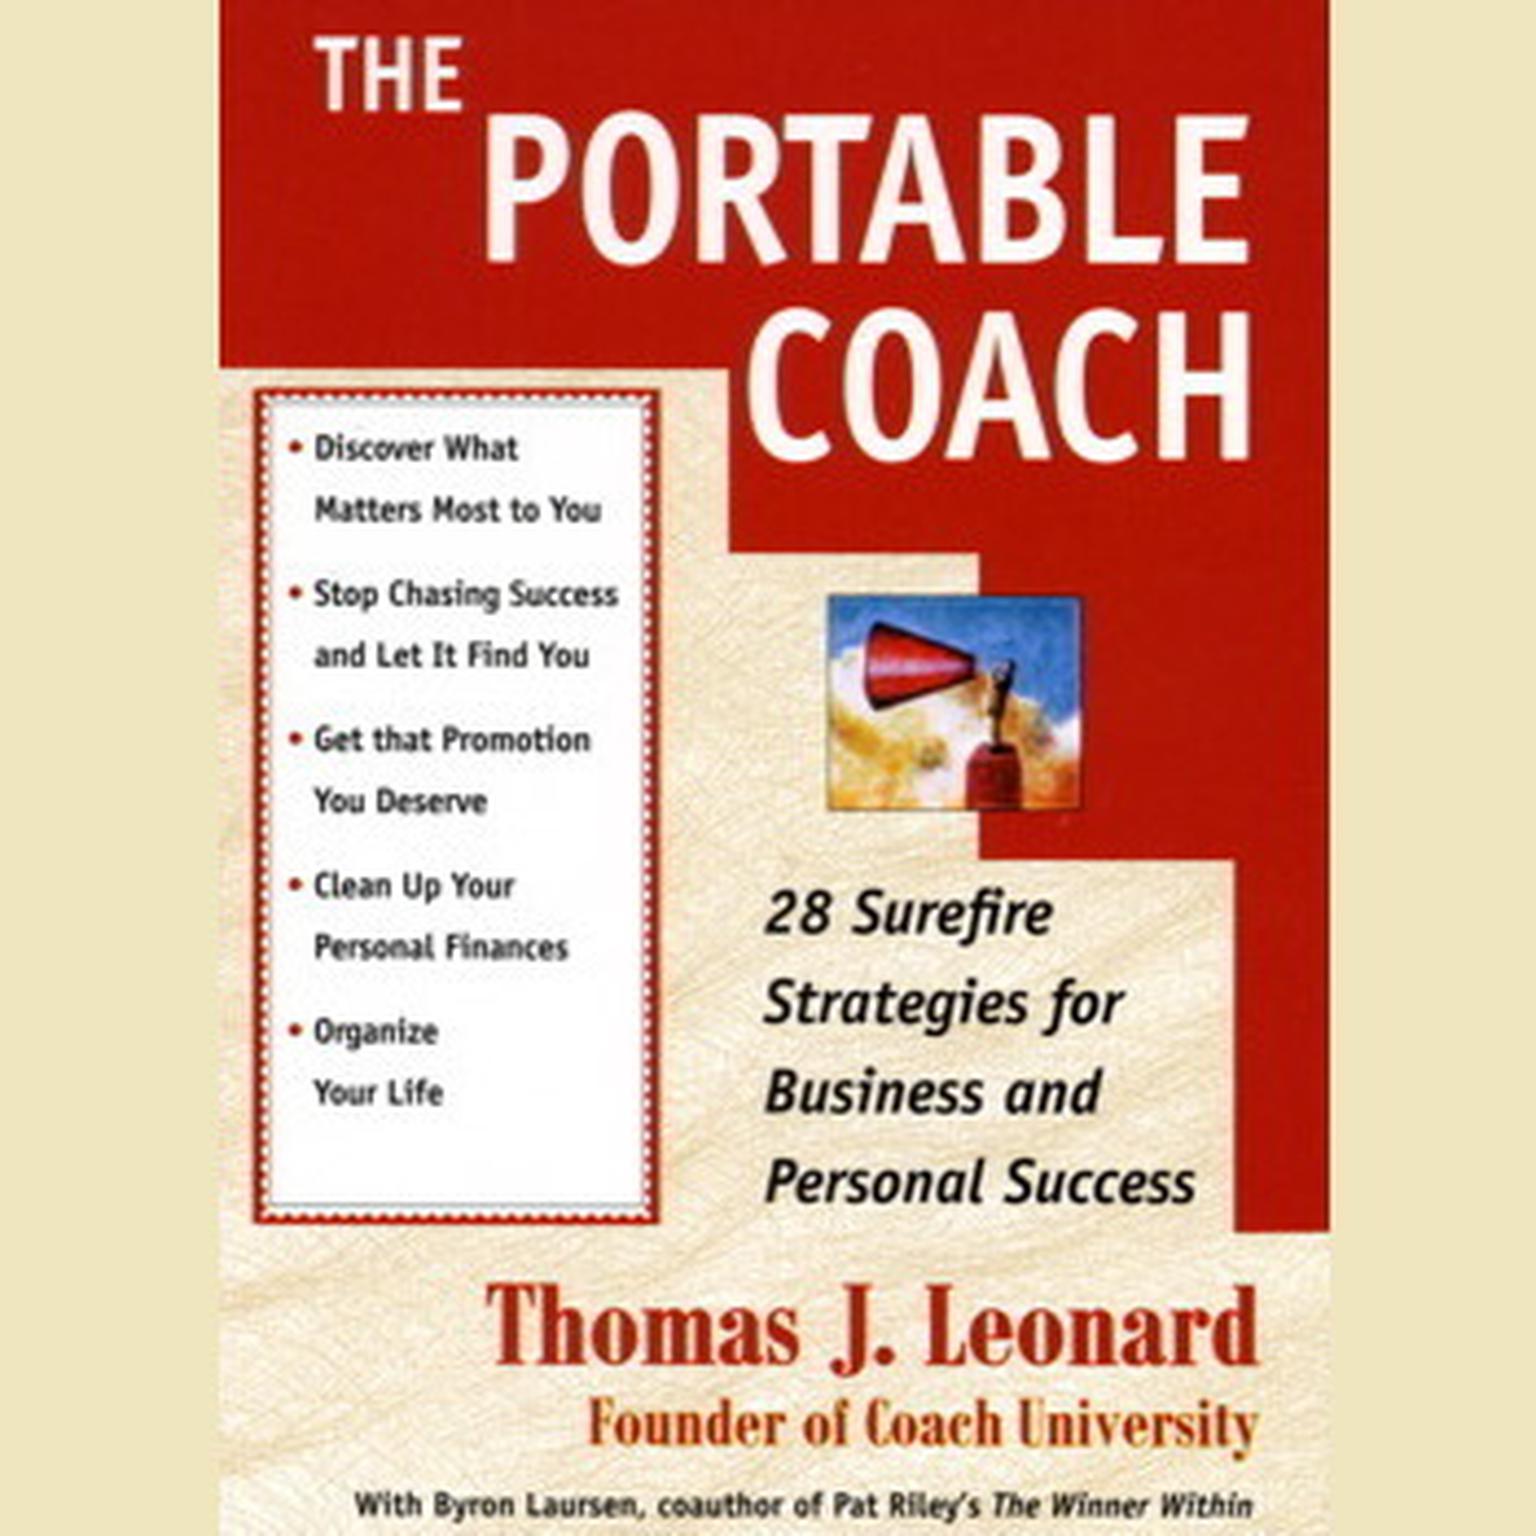 The Portable Coach (Abridged): Twenty-Eight Sure-Fire Strategies for Business and Personal Success Audiobook, by Thomas J. Leonard